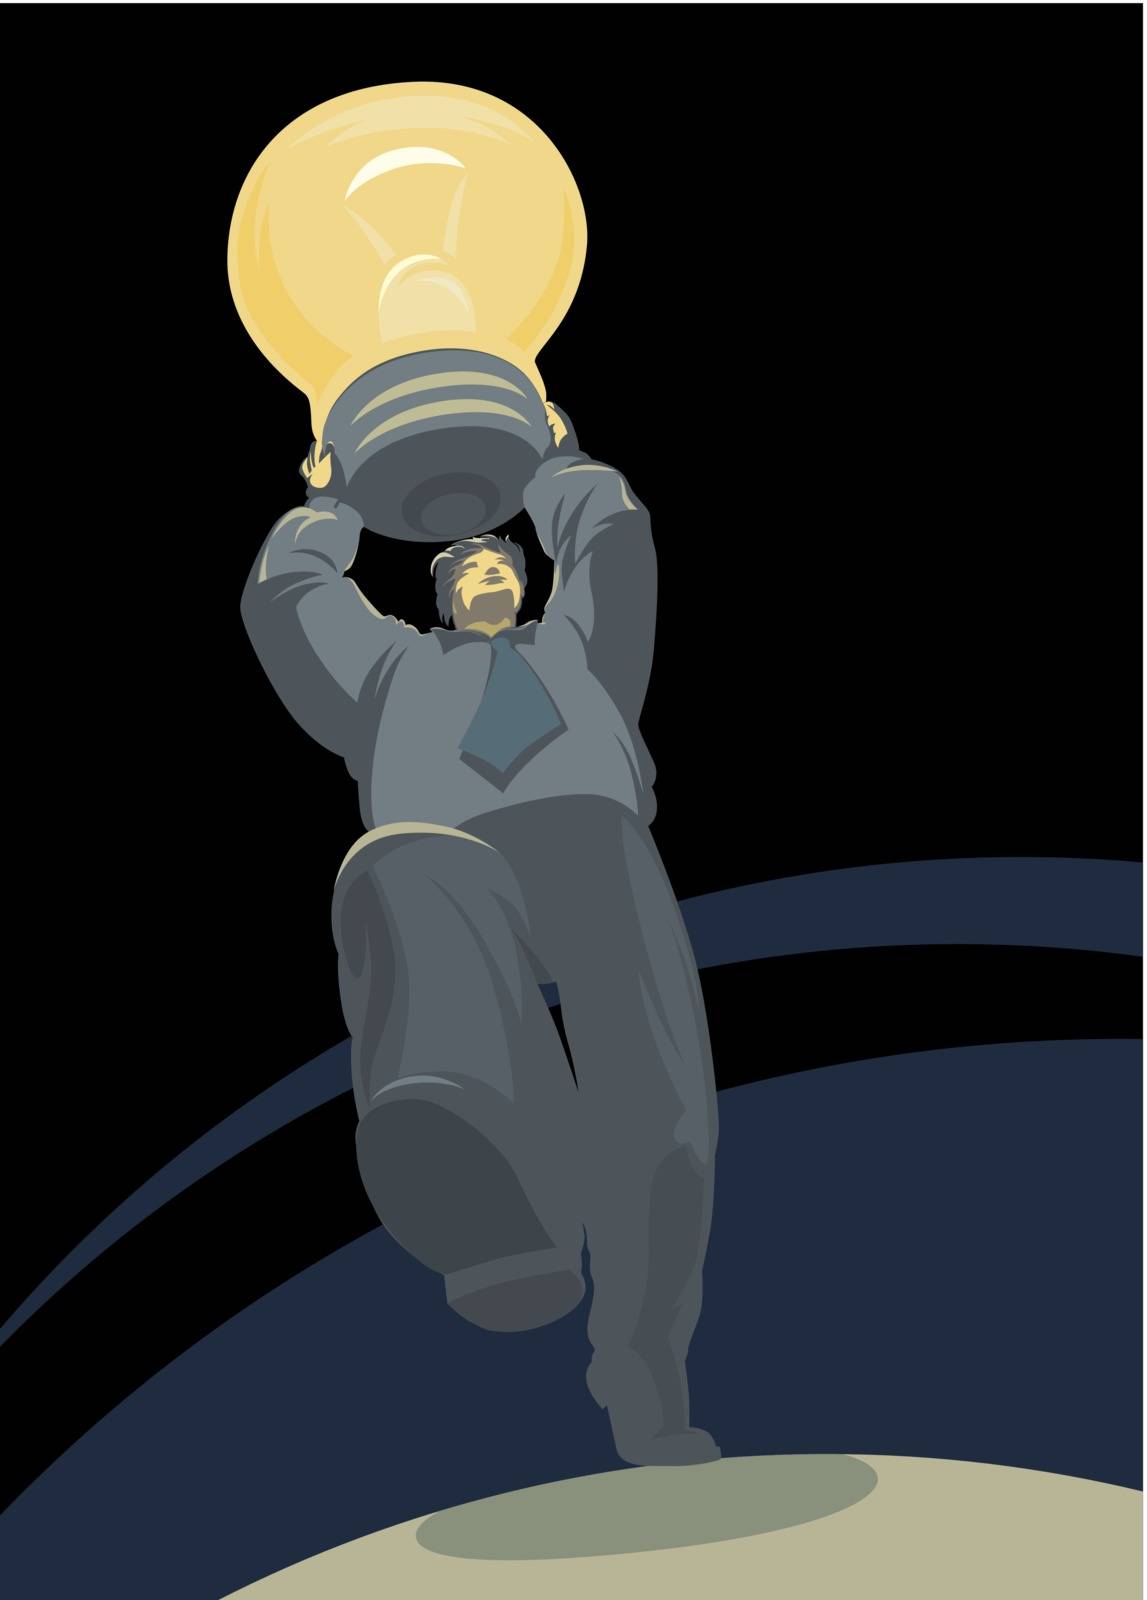 Man with bulb in hands. Conceptual vector illustration.